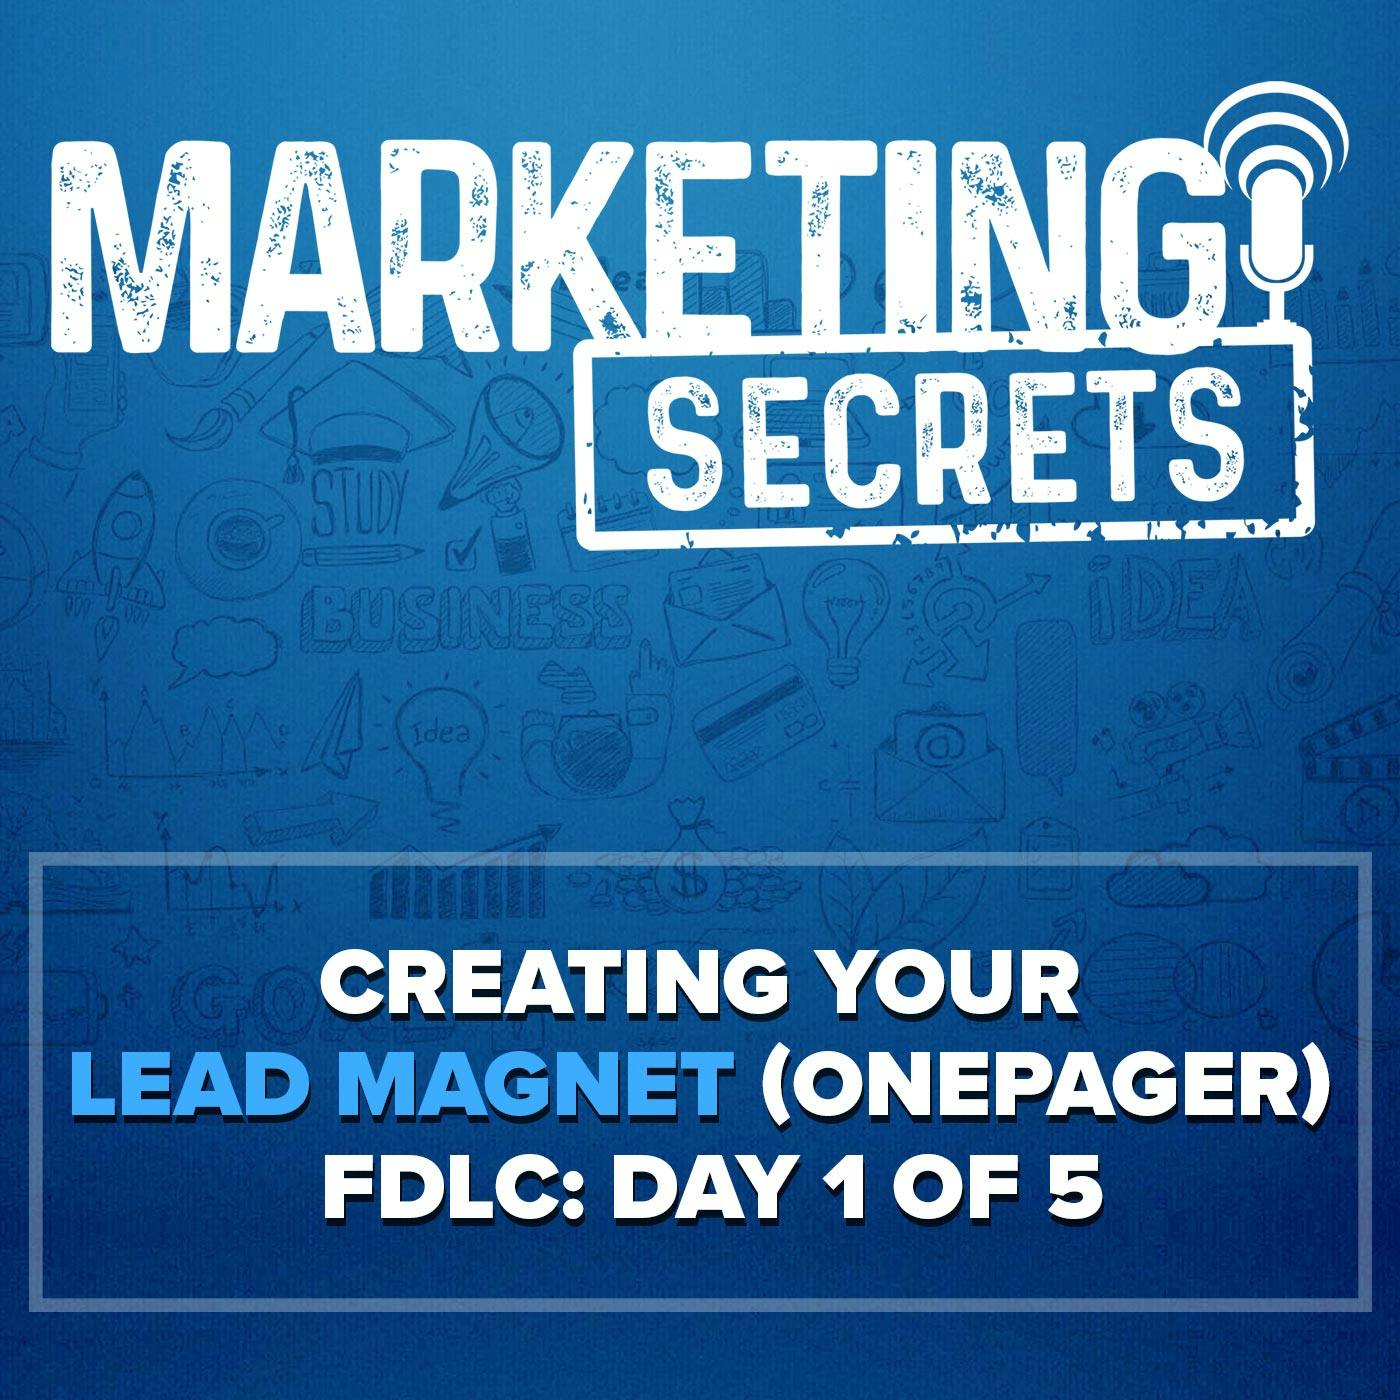 Creating Your Lead Magnet (Onepager) - FDLC: Day 2 of 5